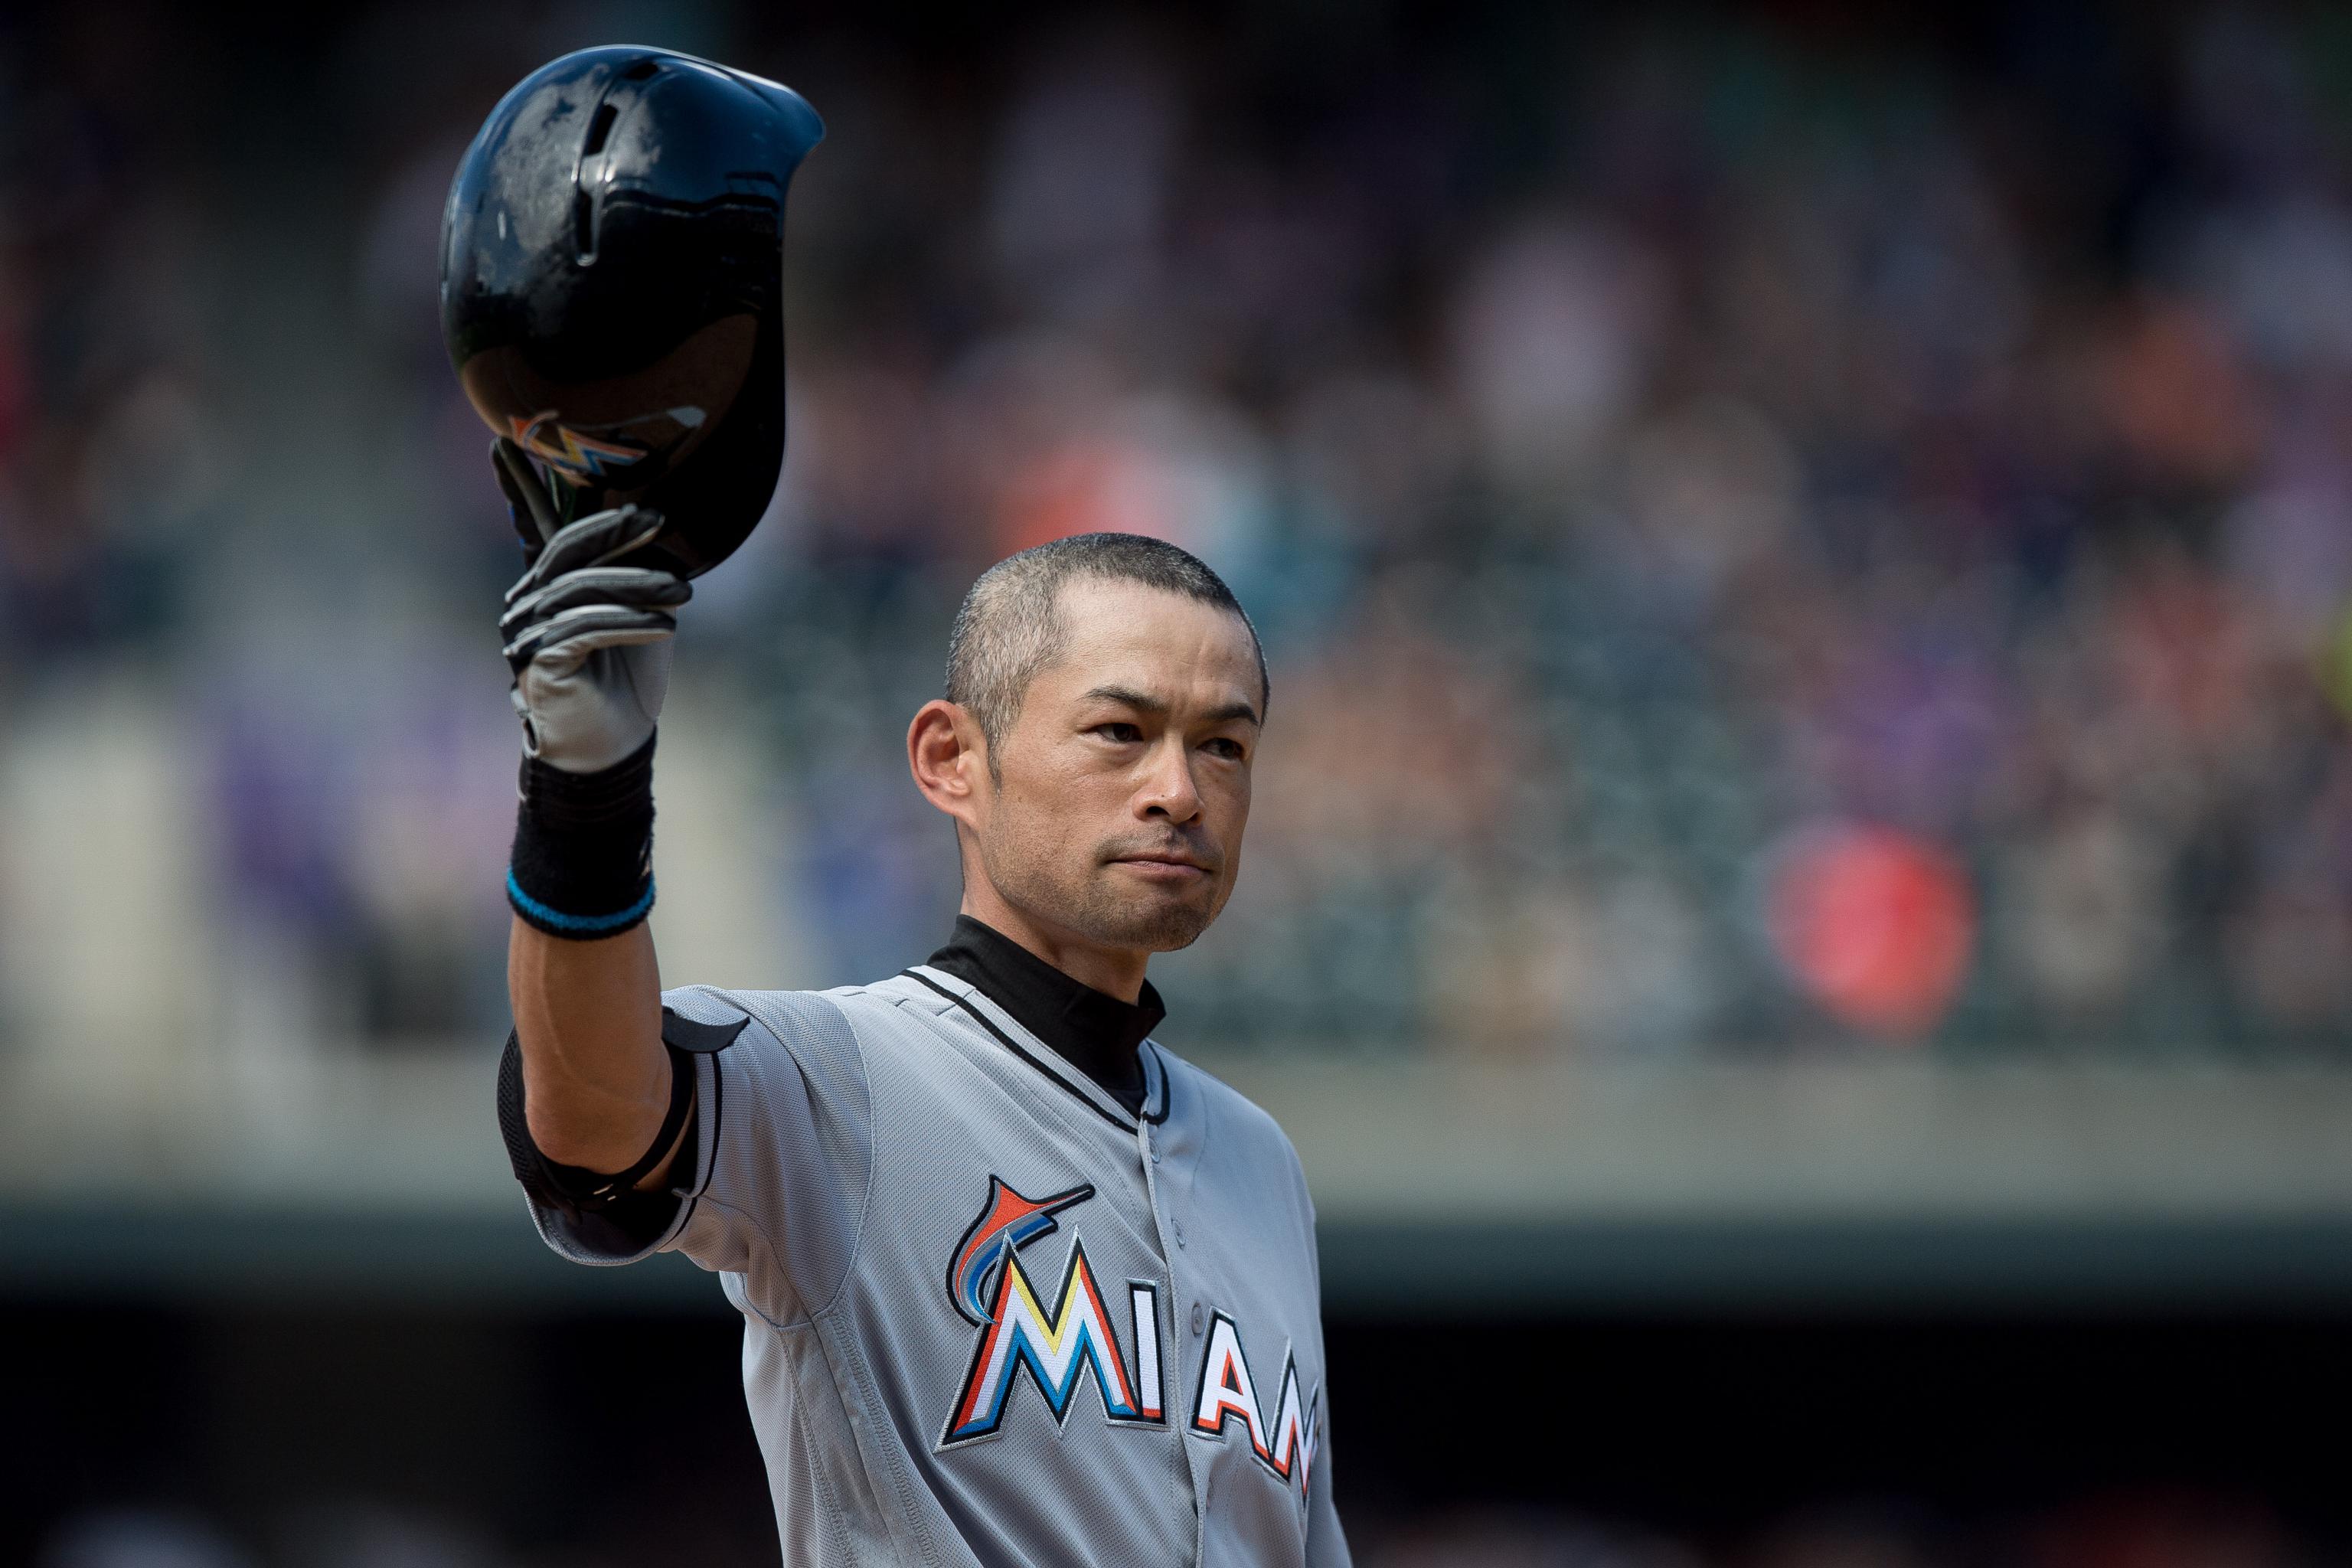 Ichiro named to all-time Rookie of the Year team - The Japan Times